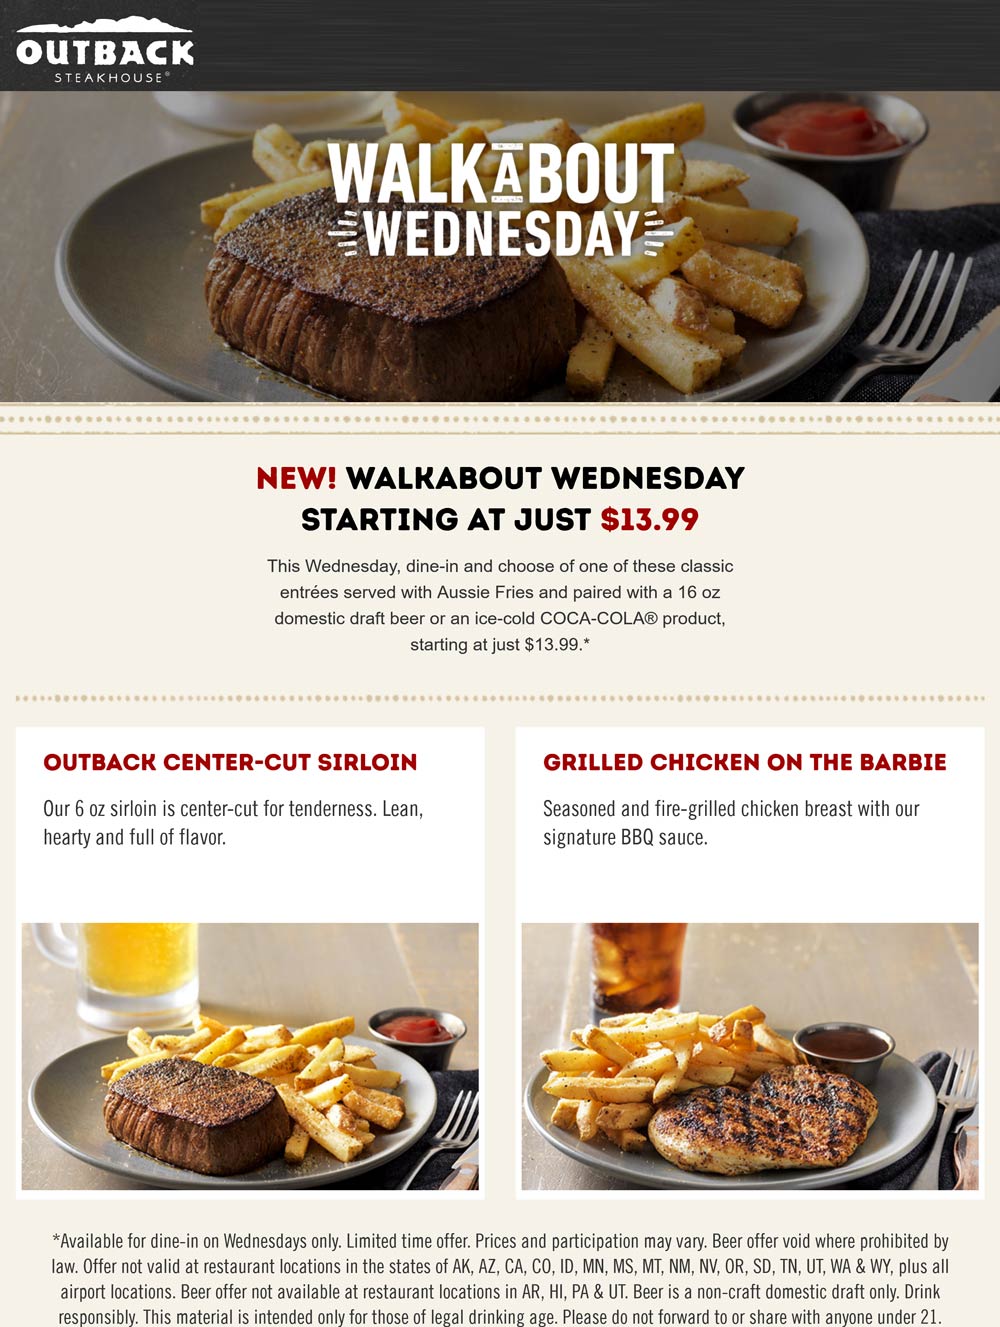 Outback Steakhouse restaurants Coupon  Sirloin steak or chicken + fries + beer or soft drink = $14 today at Outback Steakhouse #outbacksteakhouse 